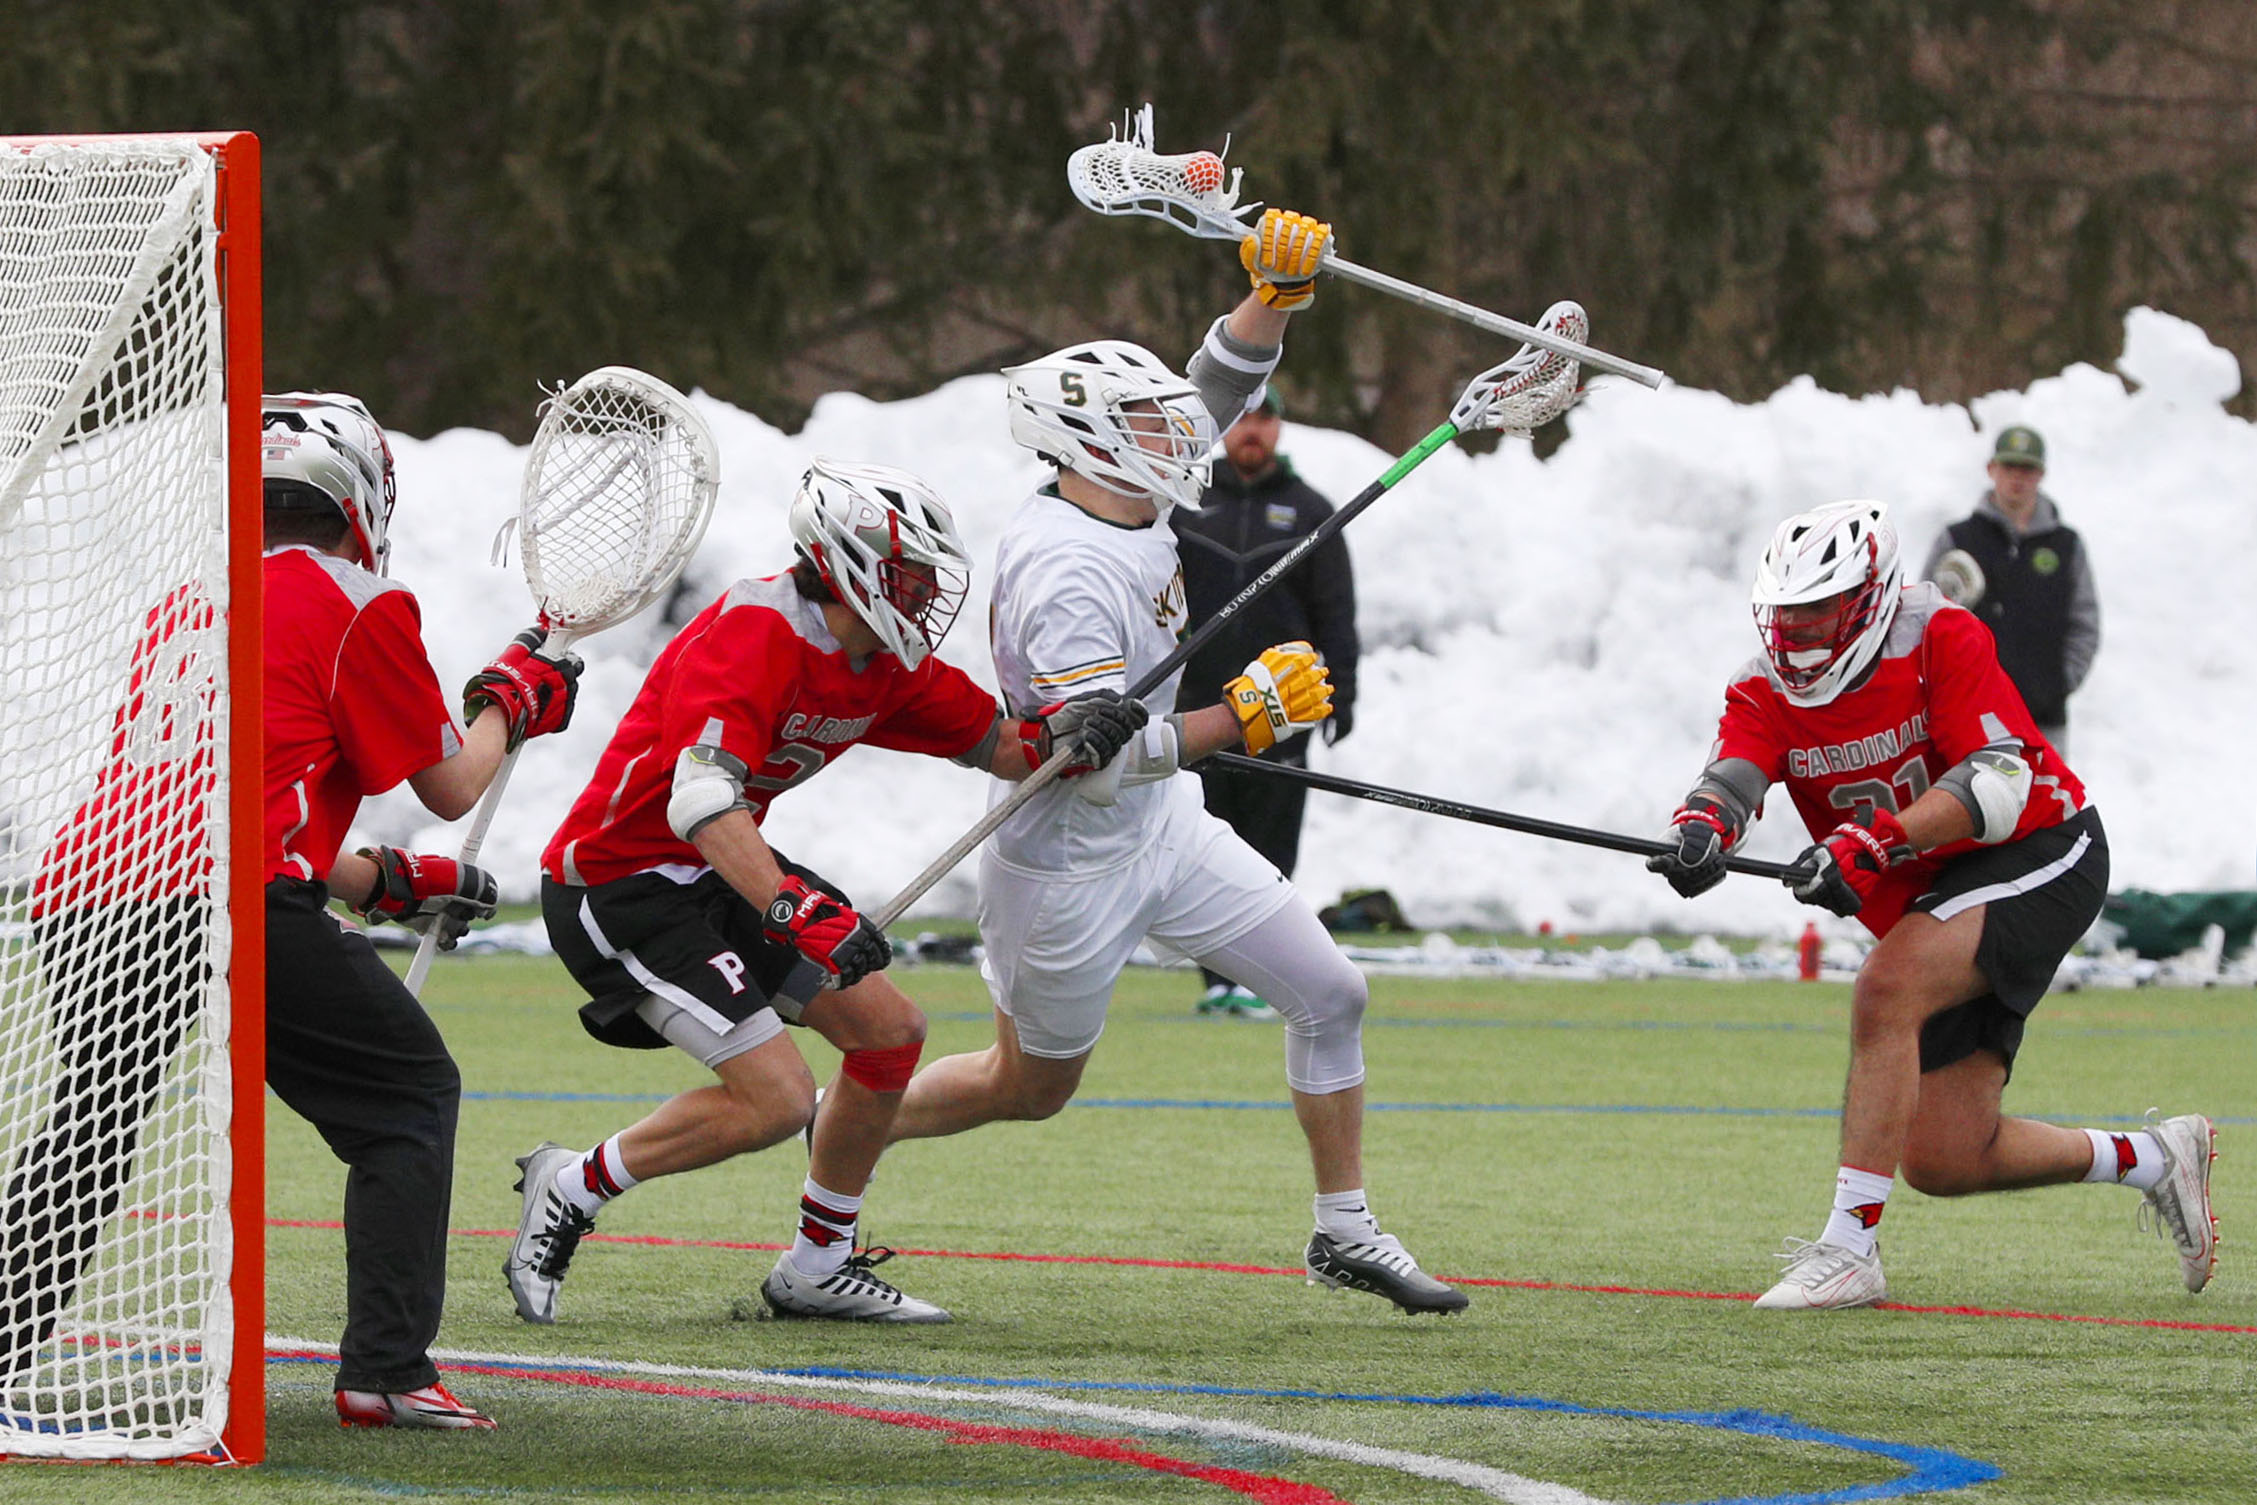 a scene of multiple men's lacrosse players in action during a game